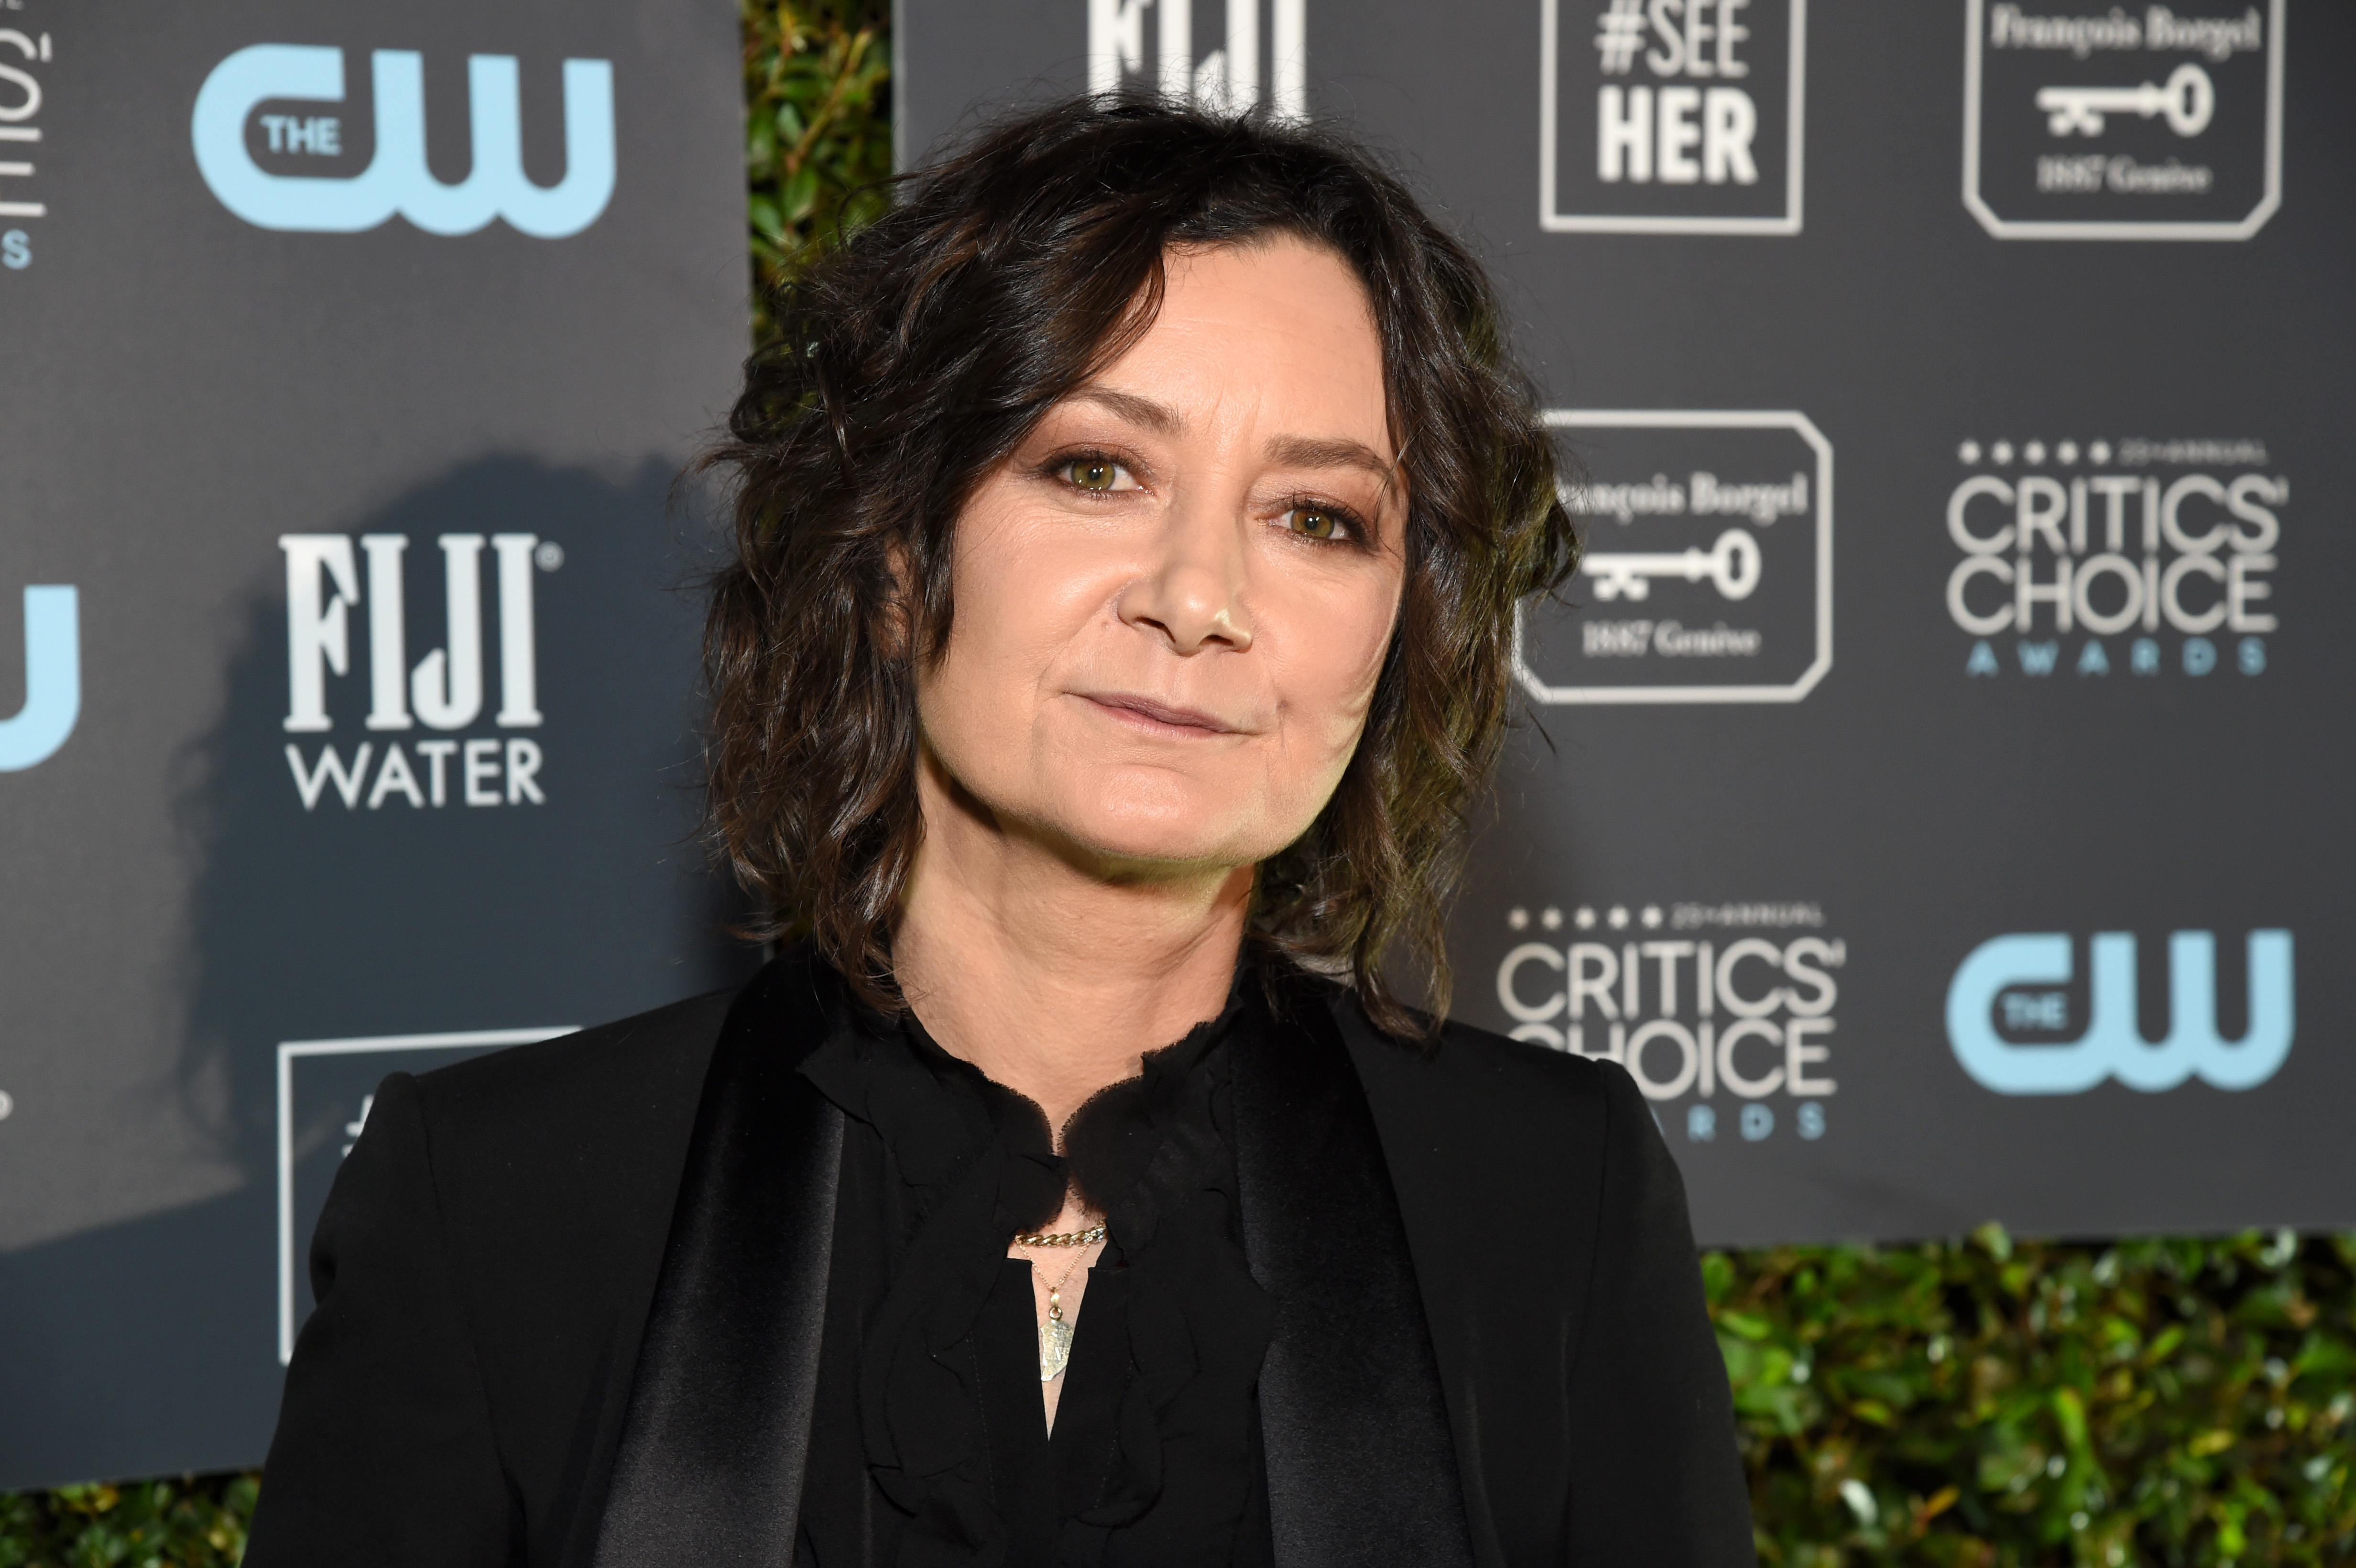 Sara Gilbert at the 25th Annual Critics' Choice Awards in Santa Monica, California on  January 12, 2020 | Source: Getty Images